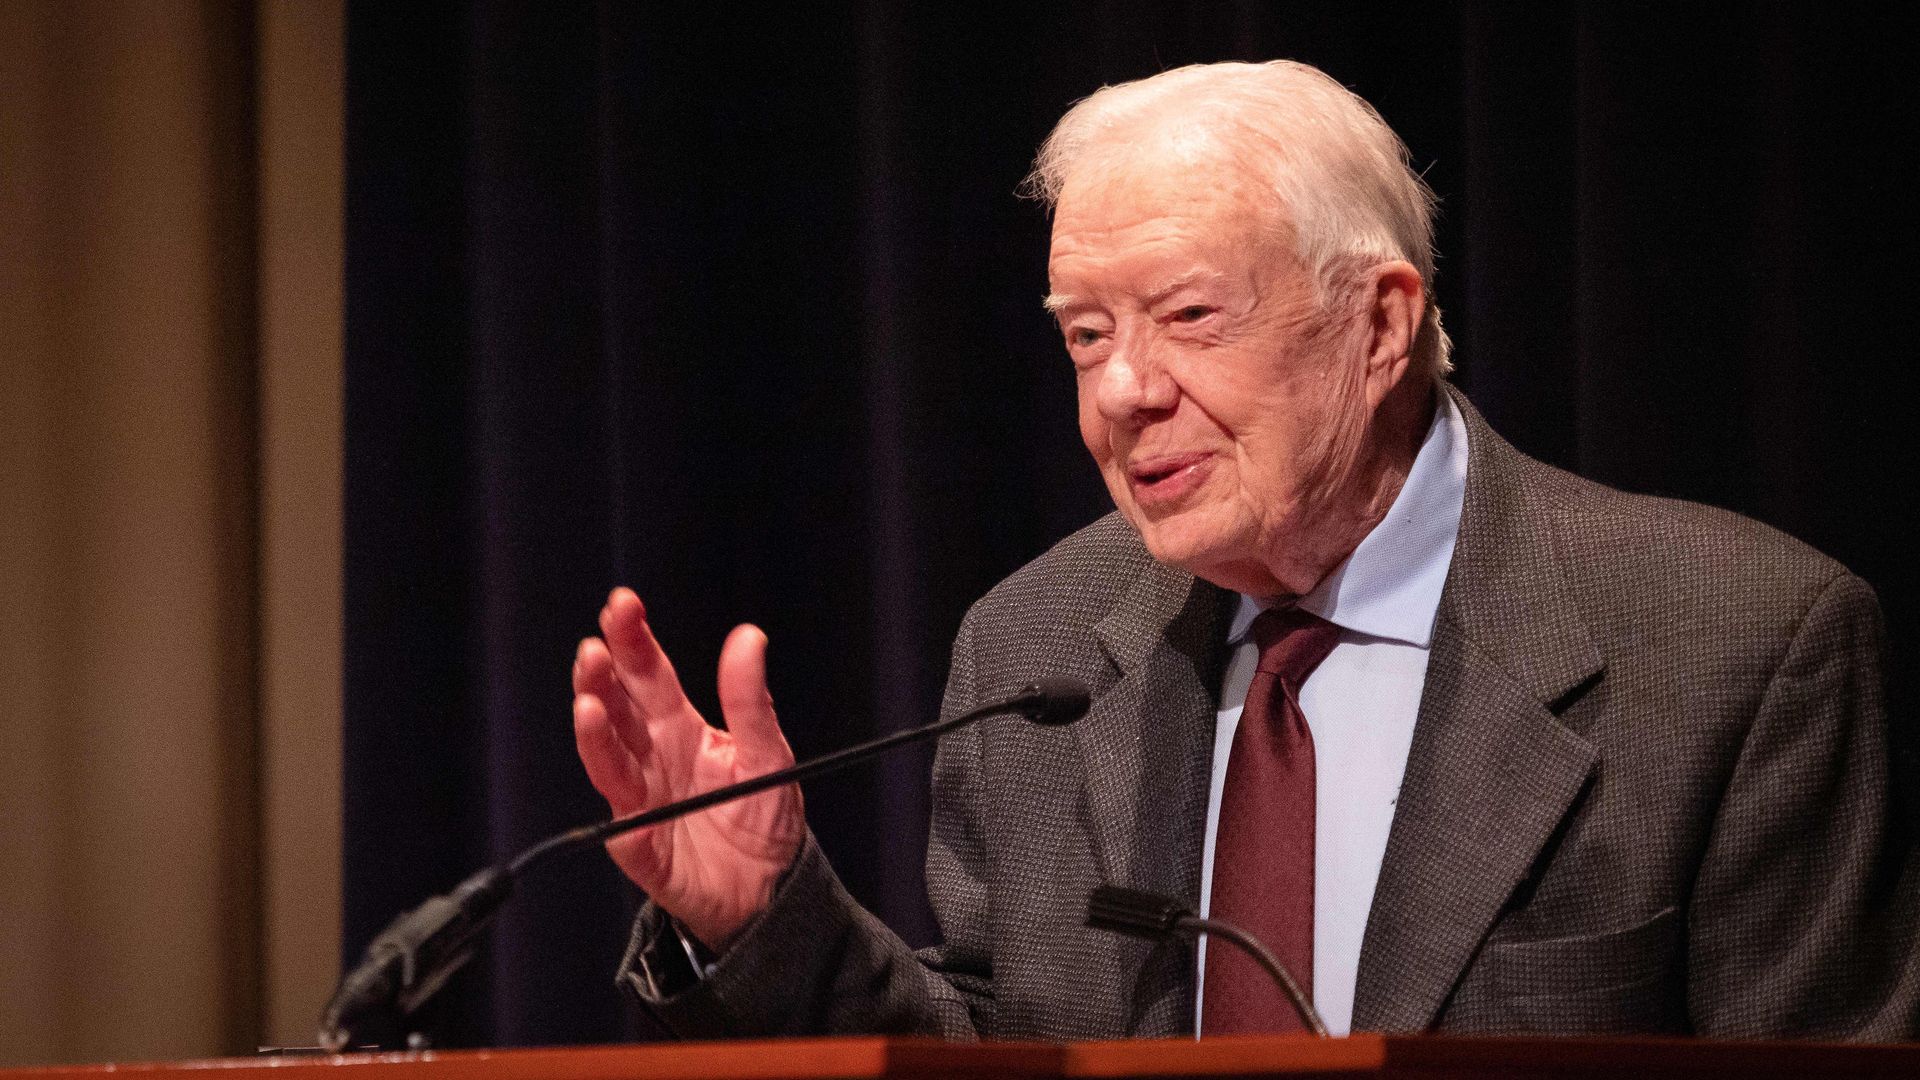 Former U.S. President Jimmy Carter speaks during the symposium commemorating the 40th anniversary of the normalization of US-China relations at the Carter Center on January 18